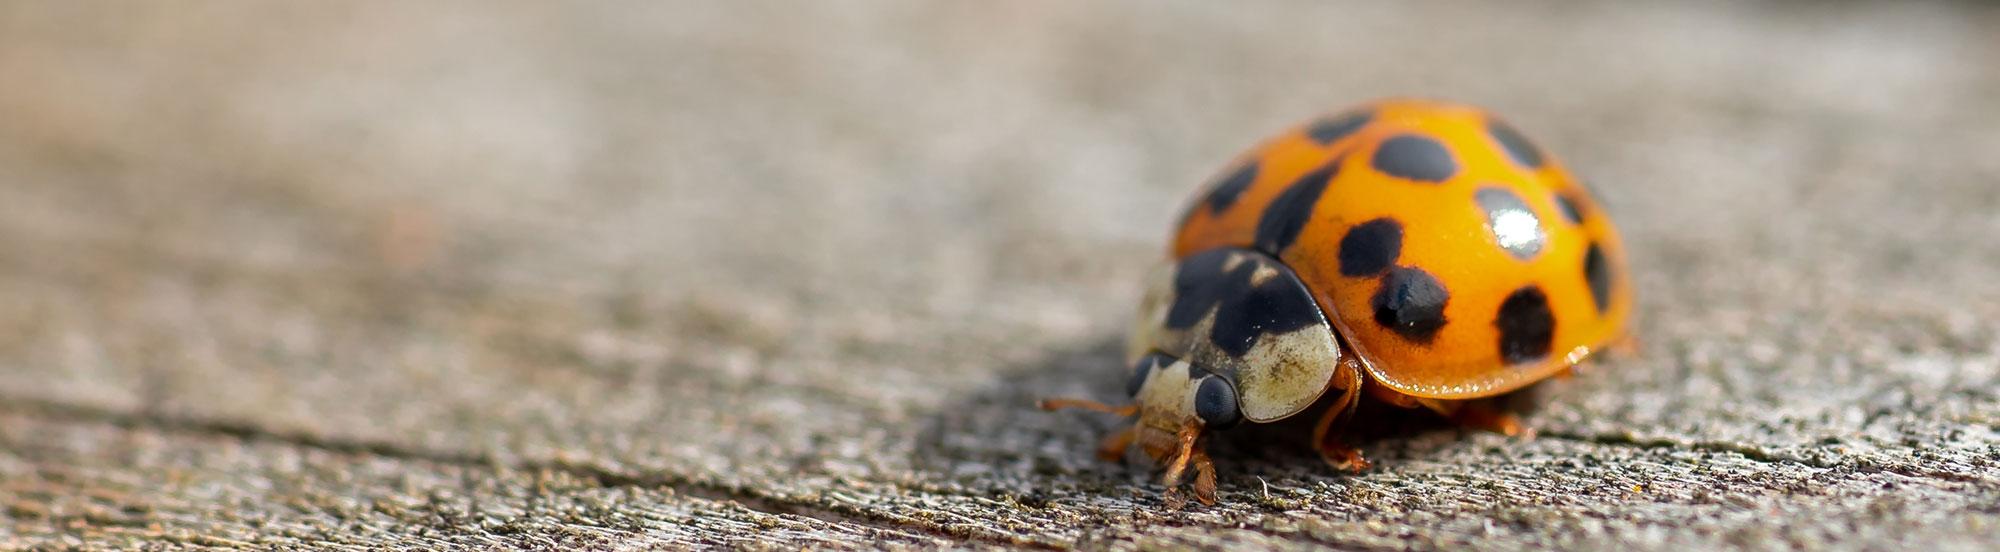 multicolored Asian lady beetle crawling across driveway